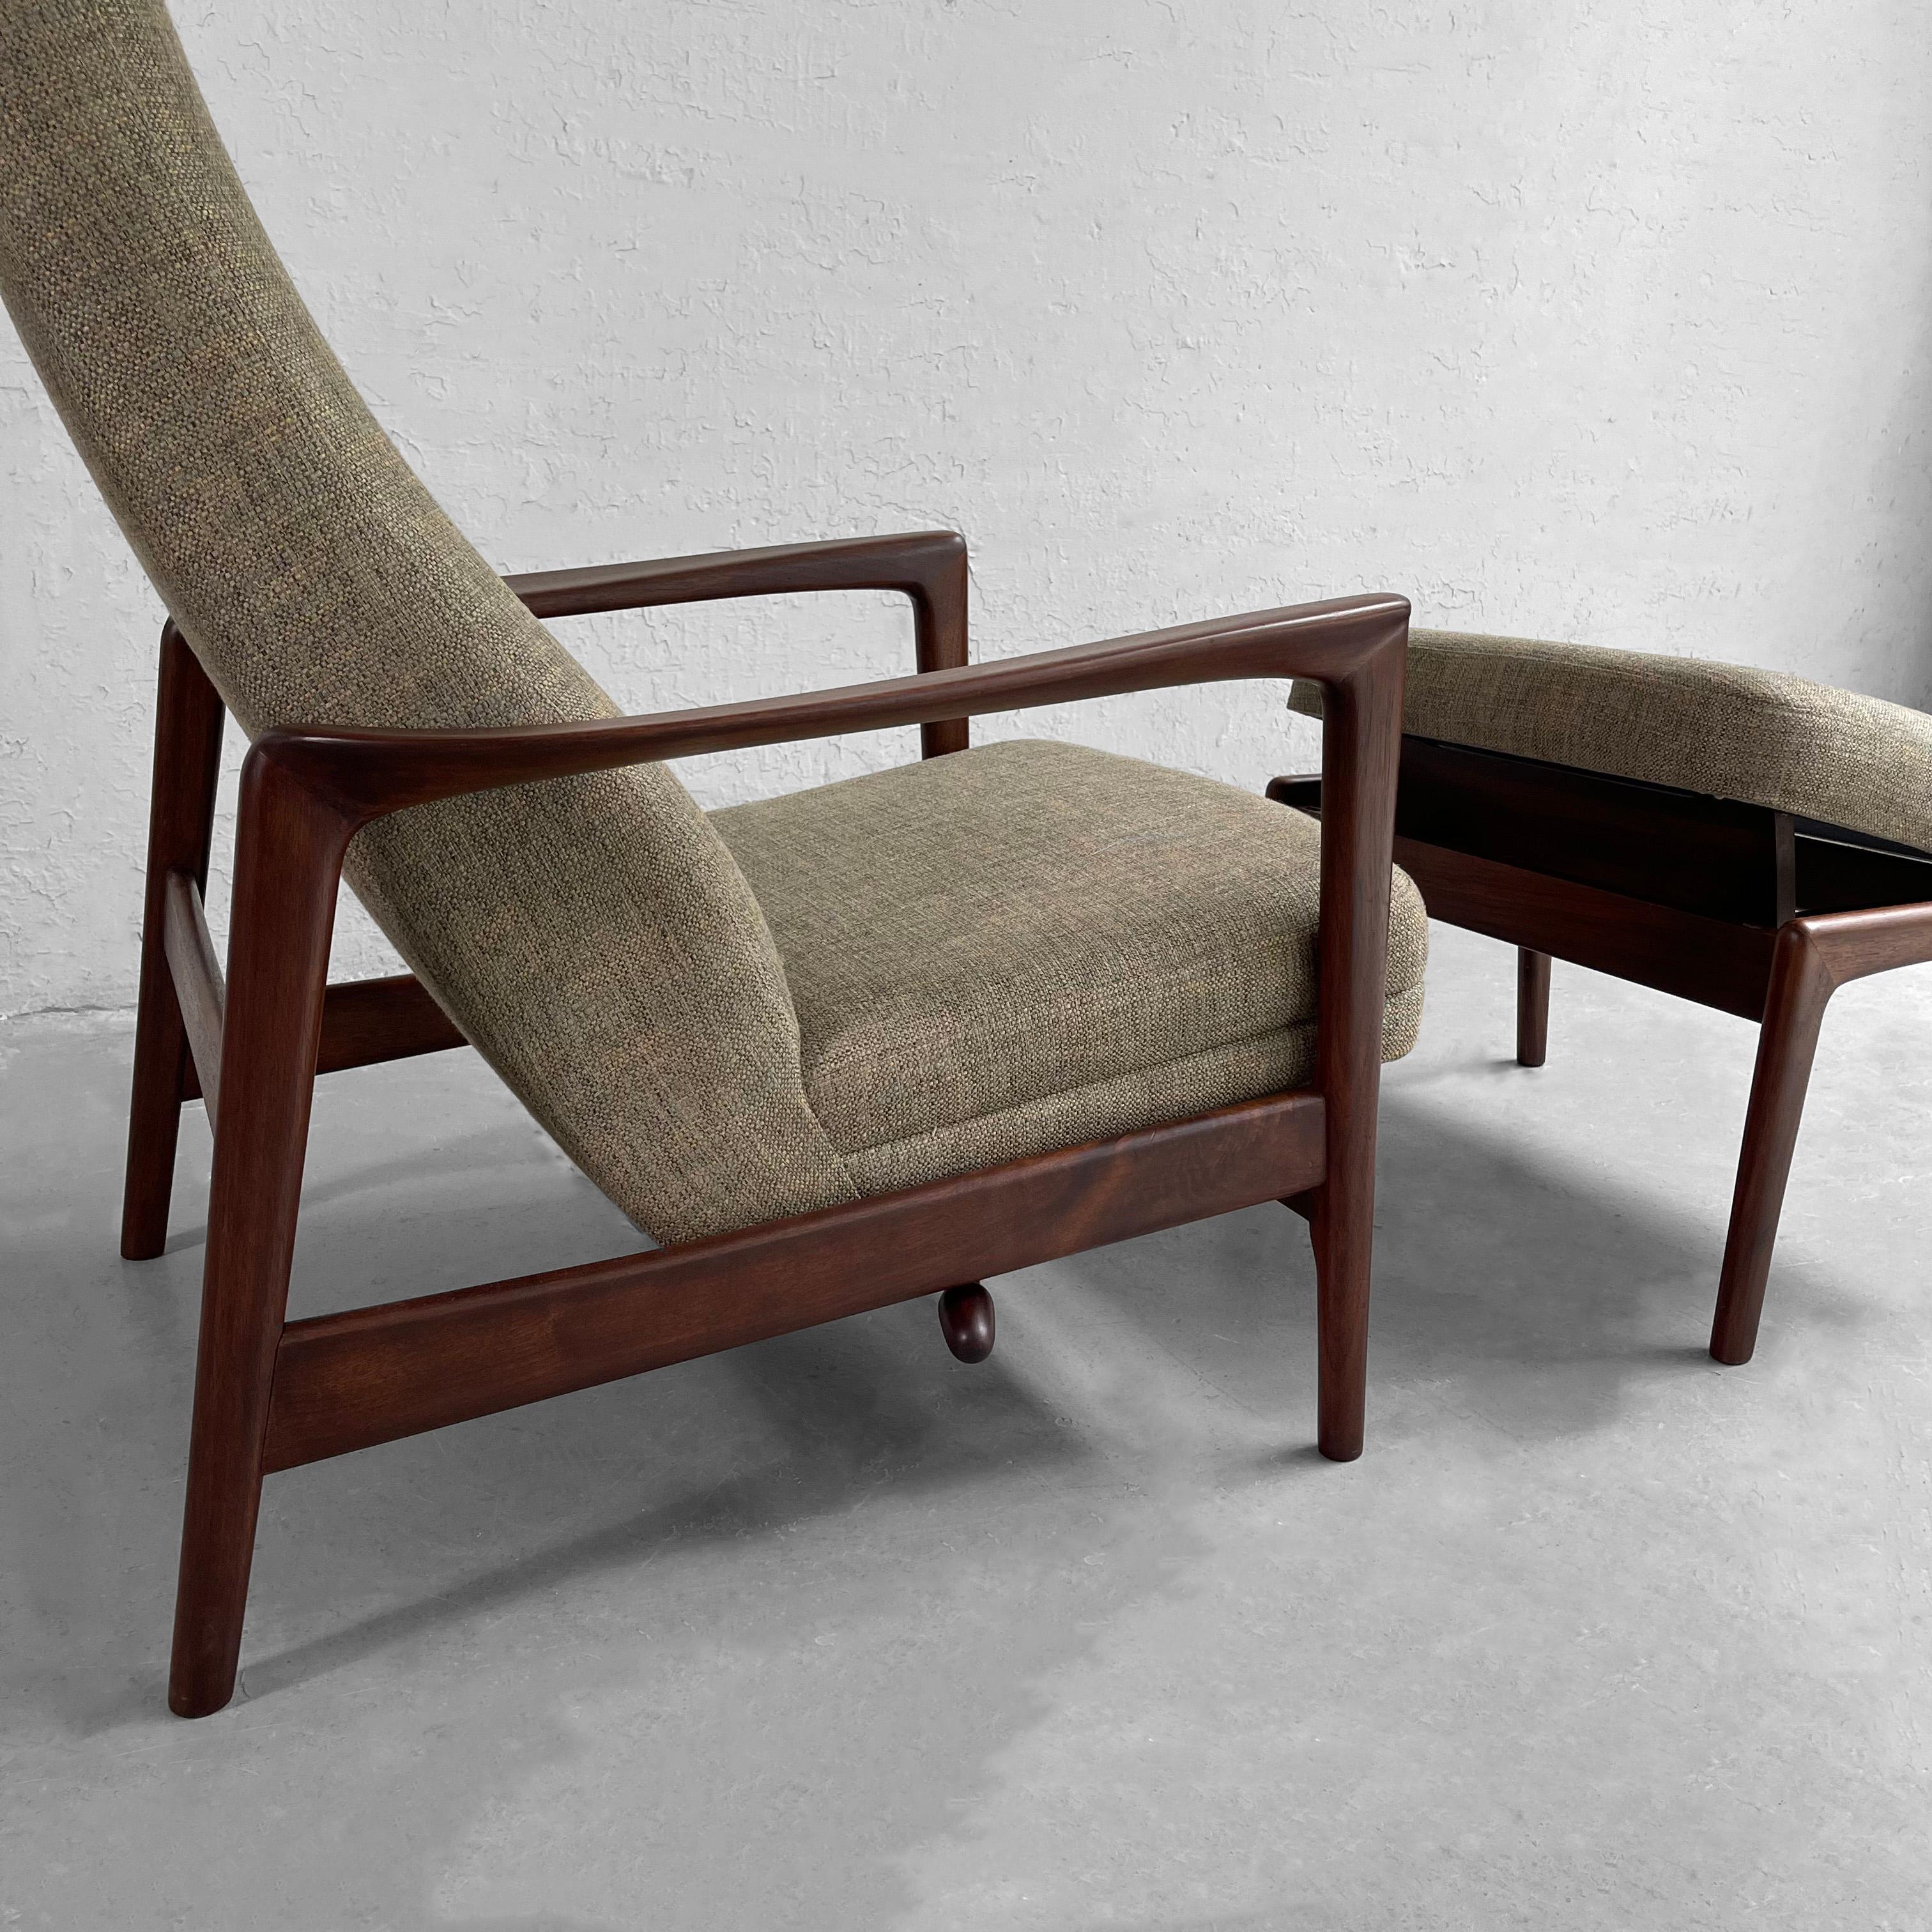 20th Century Recliner Lounge Chair with Ottoman by Folke Ohlsson for DUX